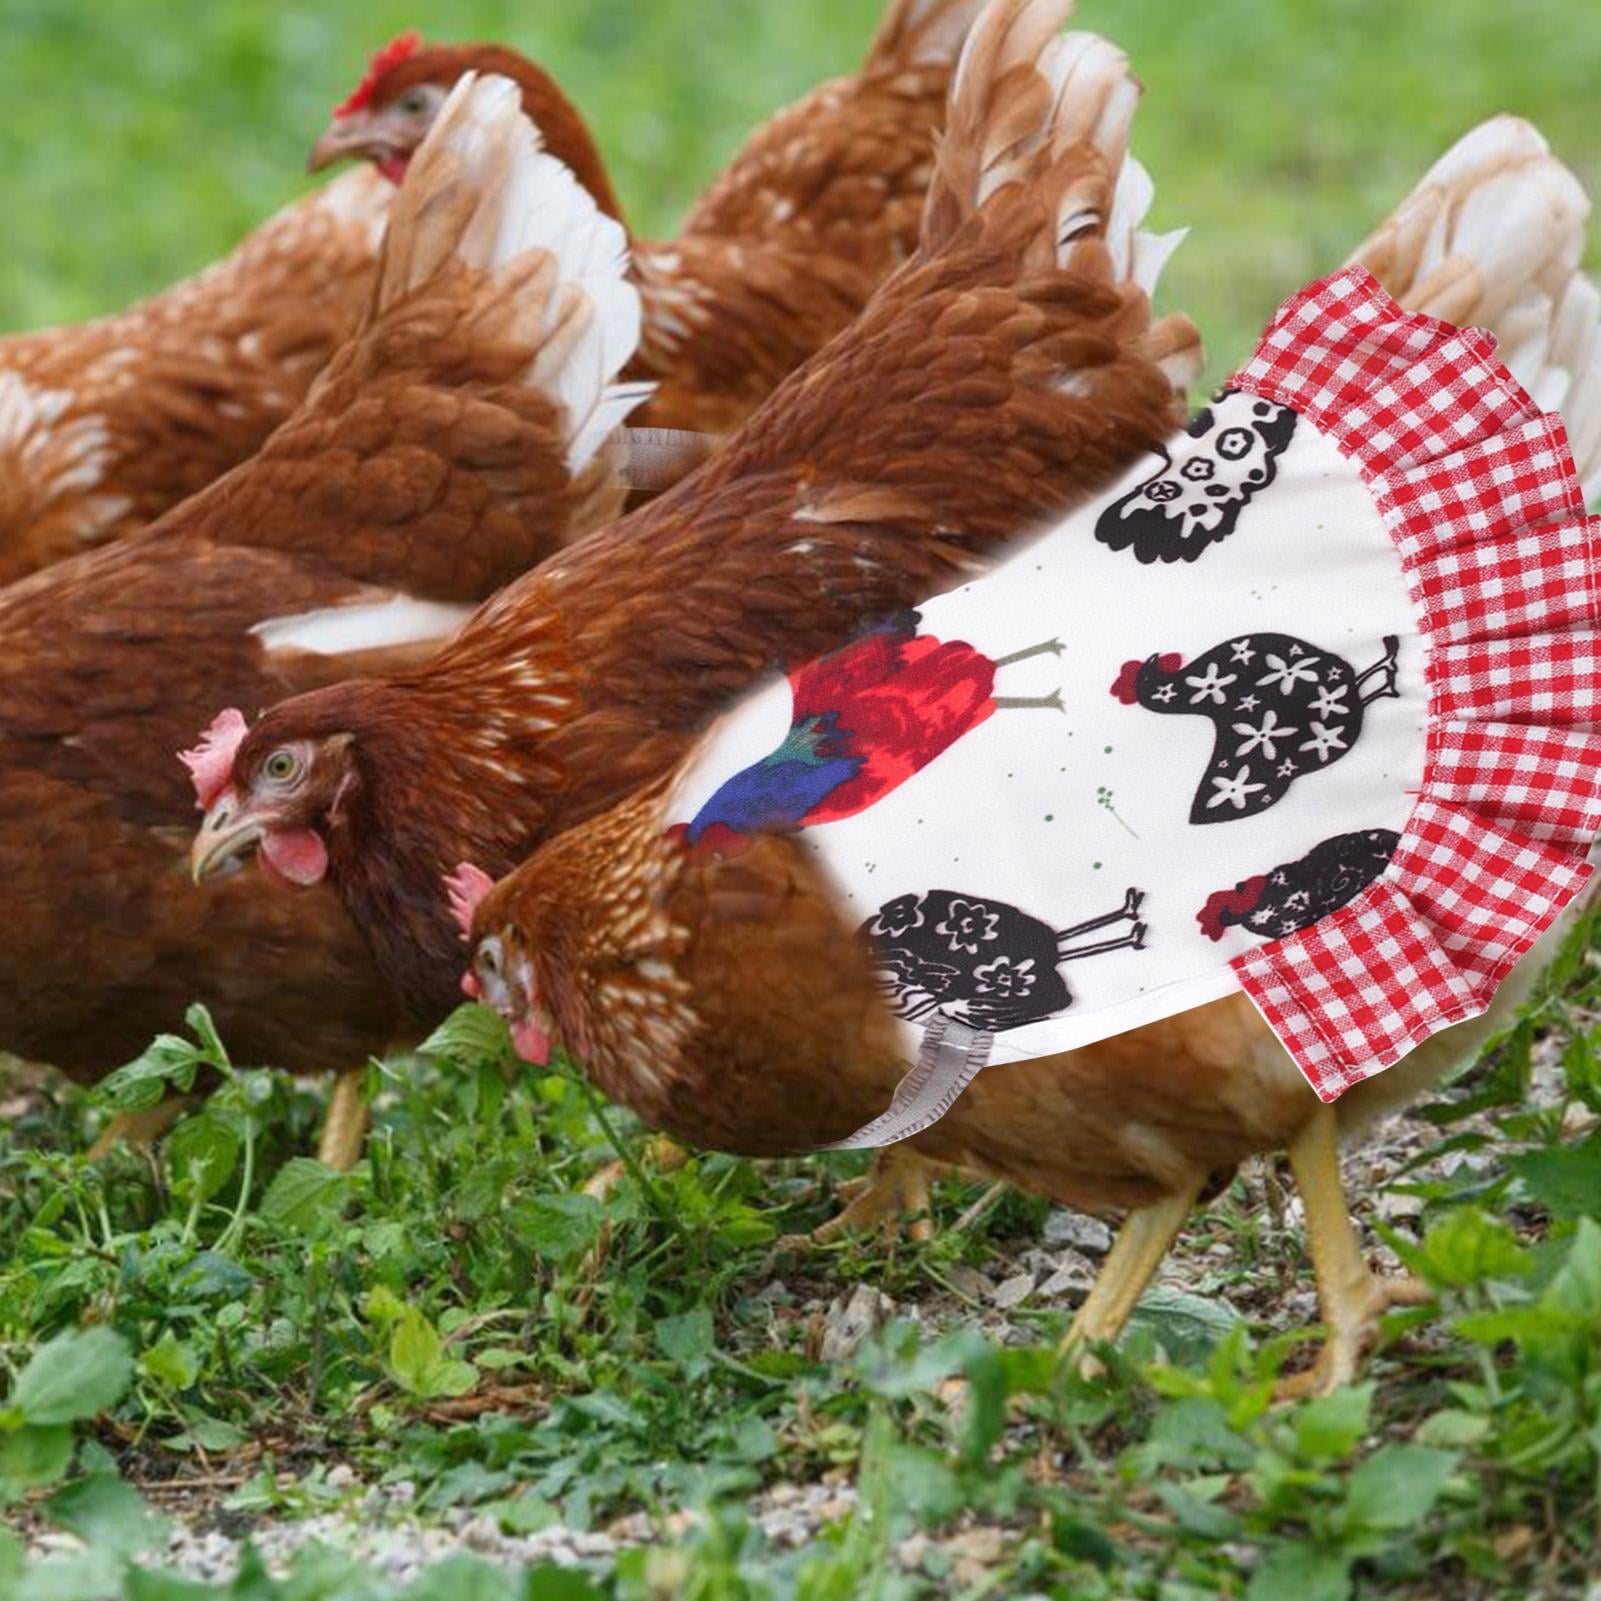 12 SUPER WIDE & LONG CHICKEN SADDLE APRON HEN FEATHER PROTECTION HATCHING EGGS 